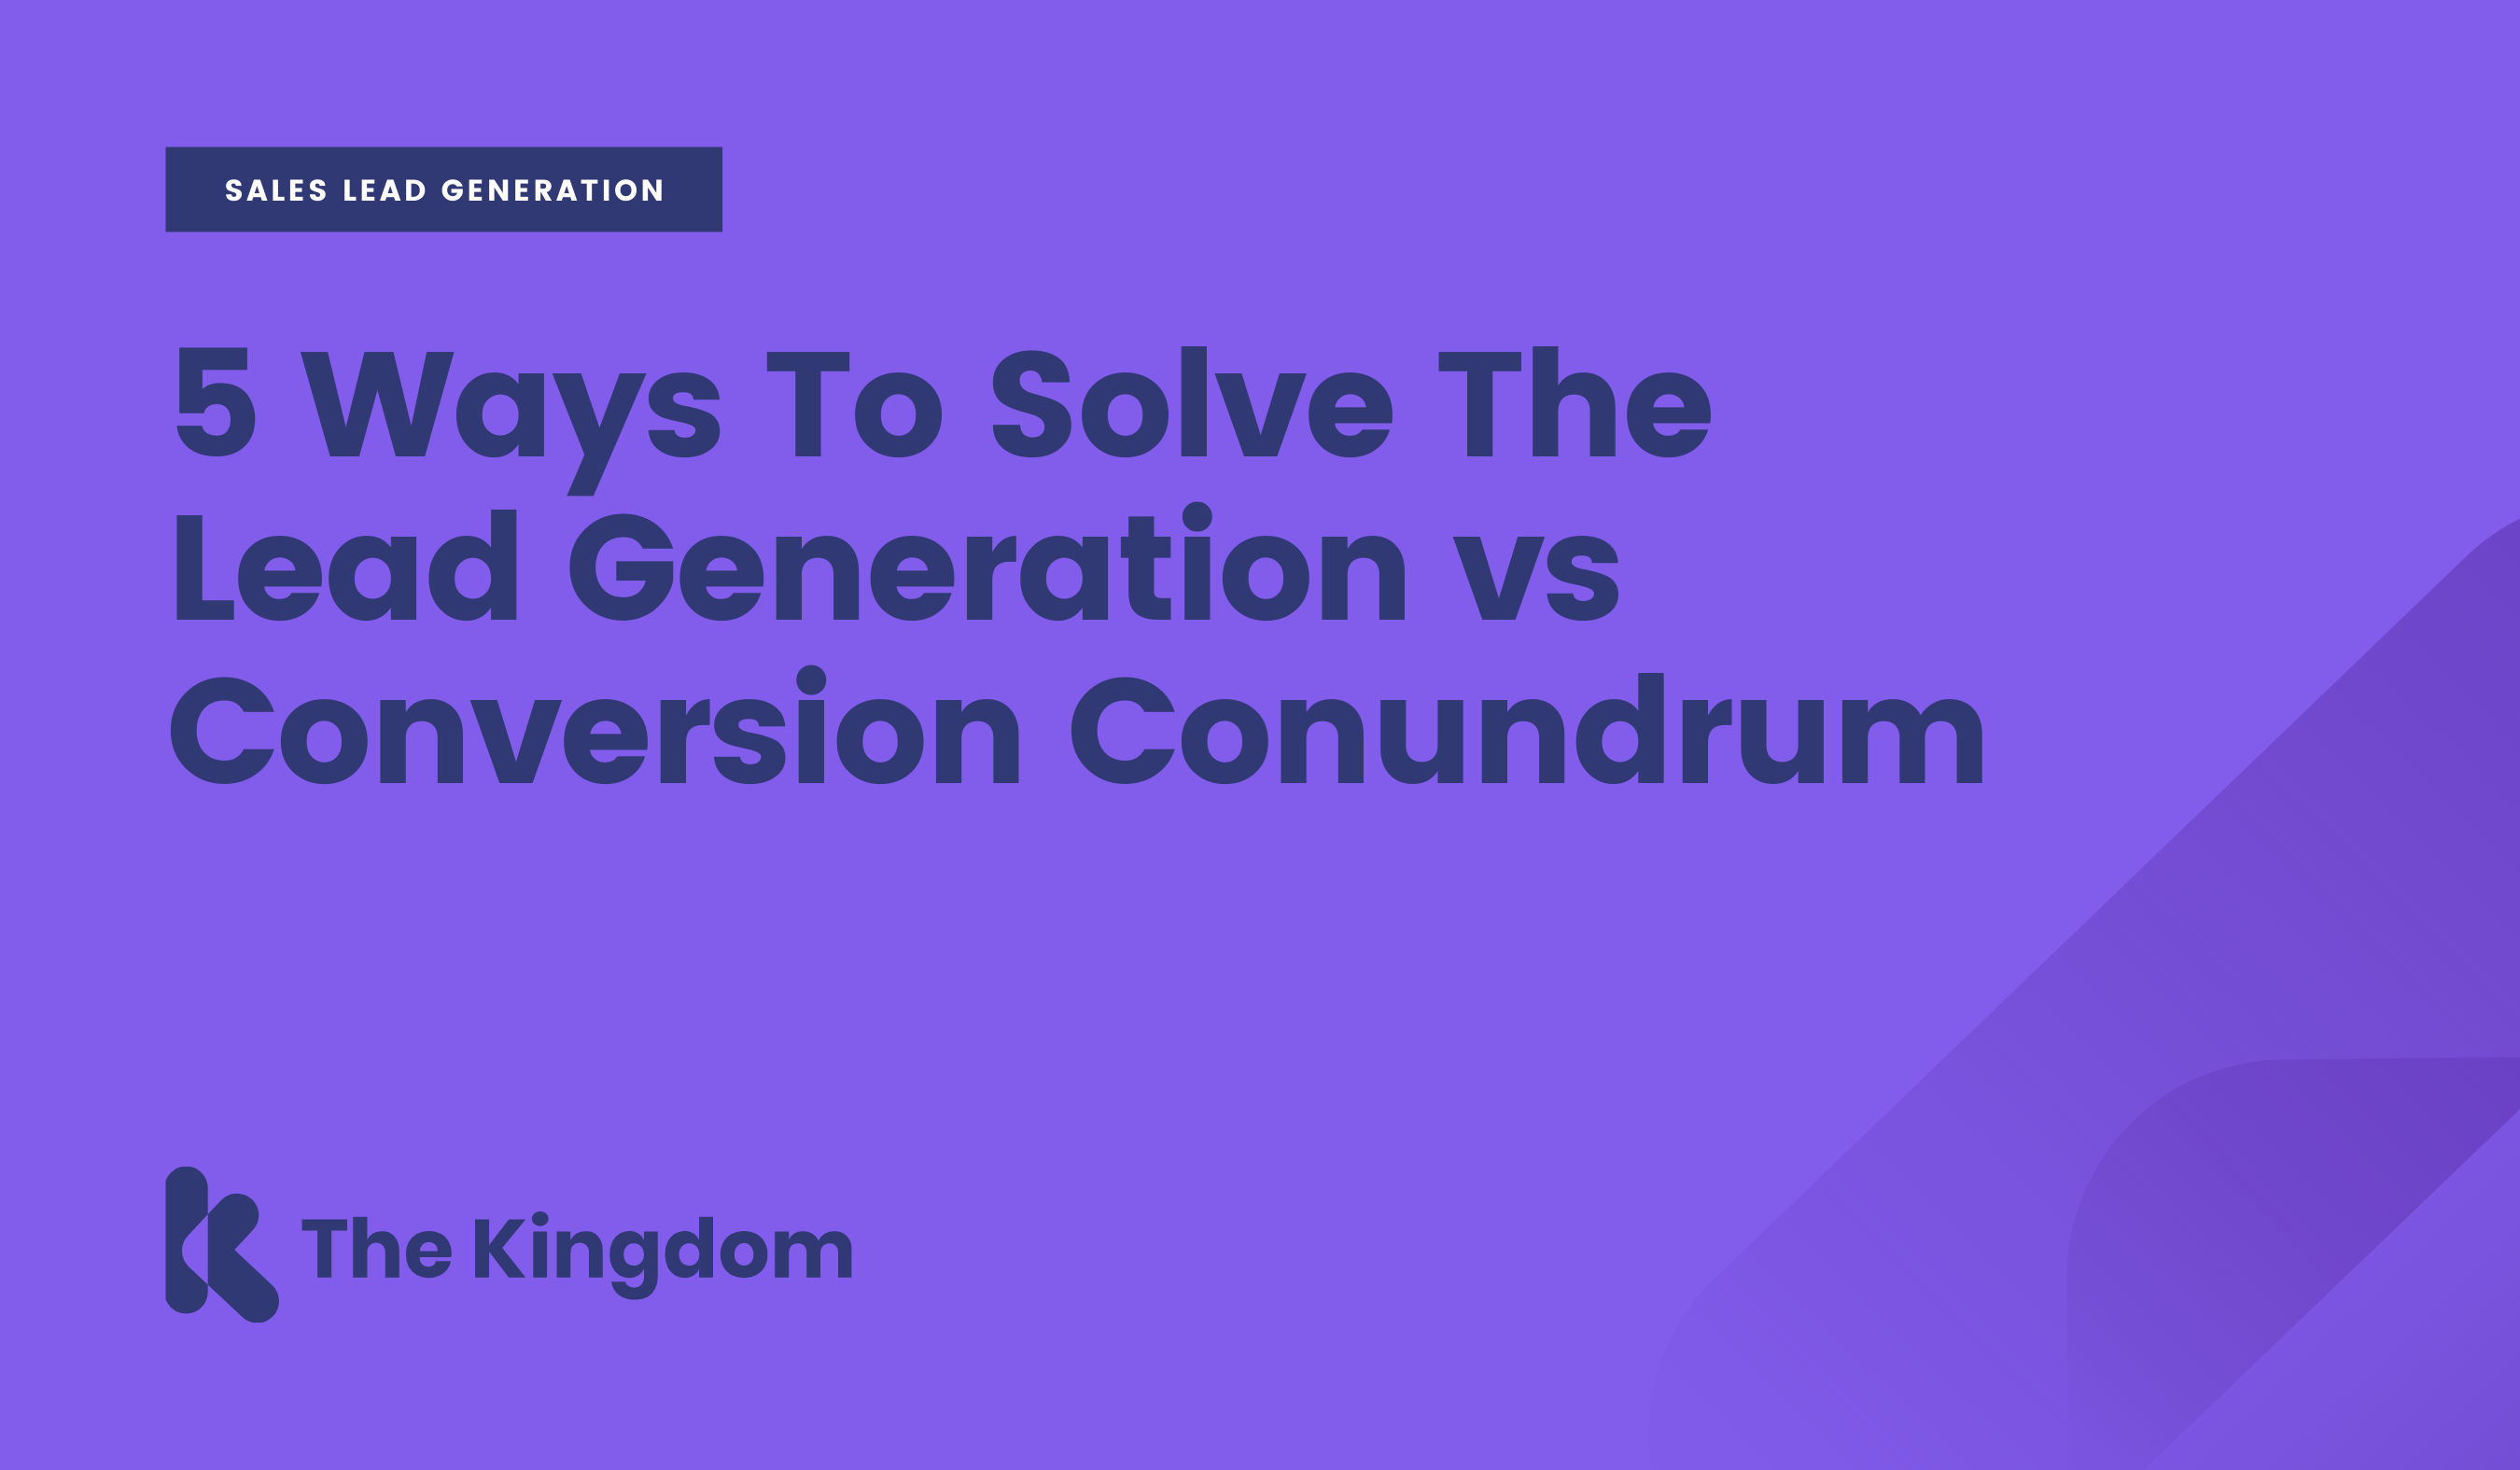 5 Ways to Solve The Lead Generation vs Conversion Conundrum